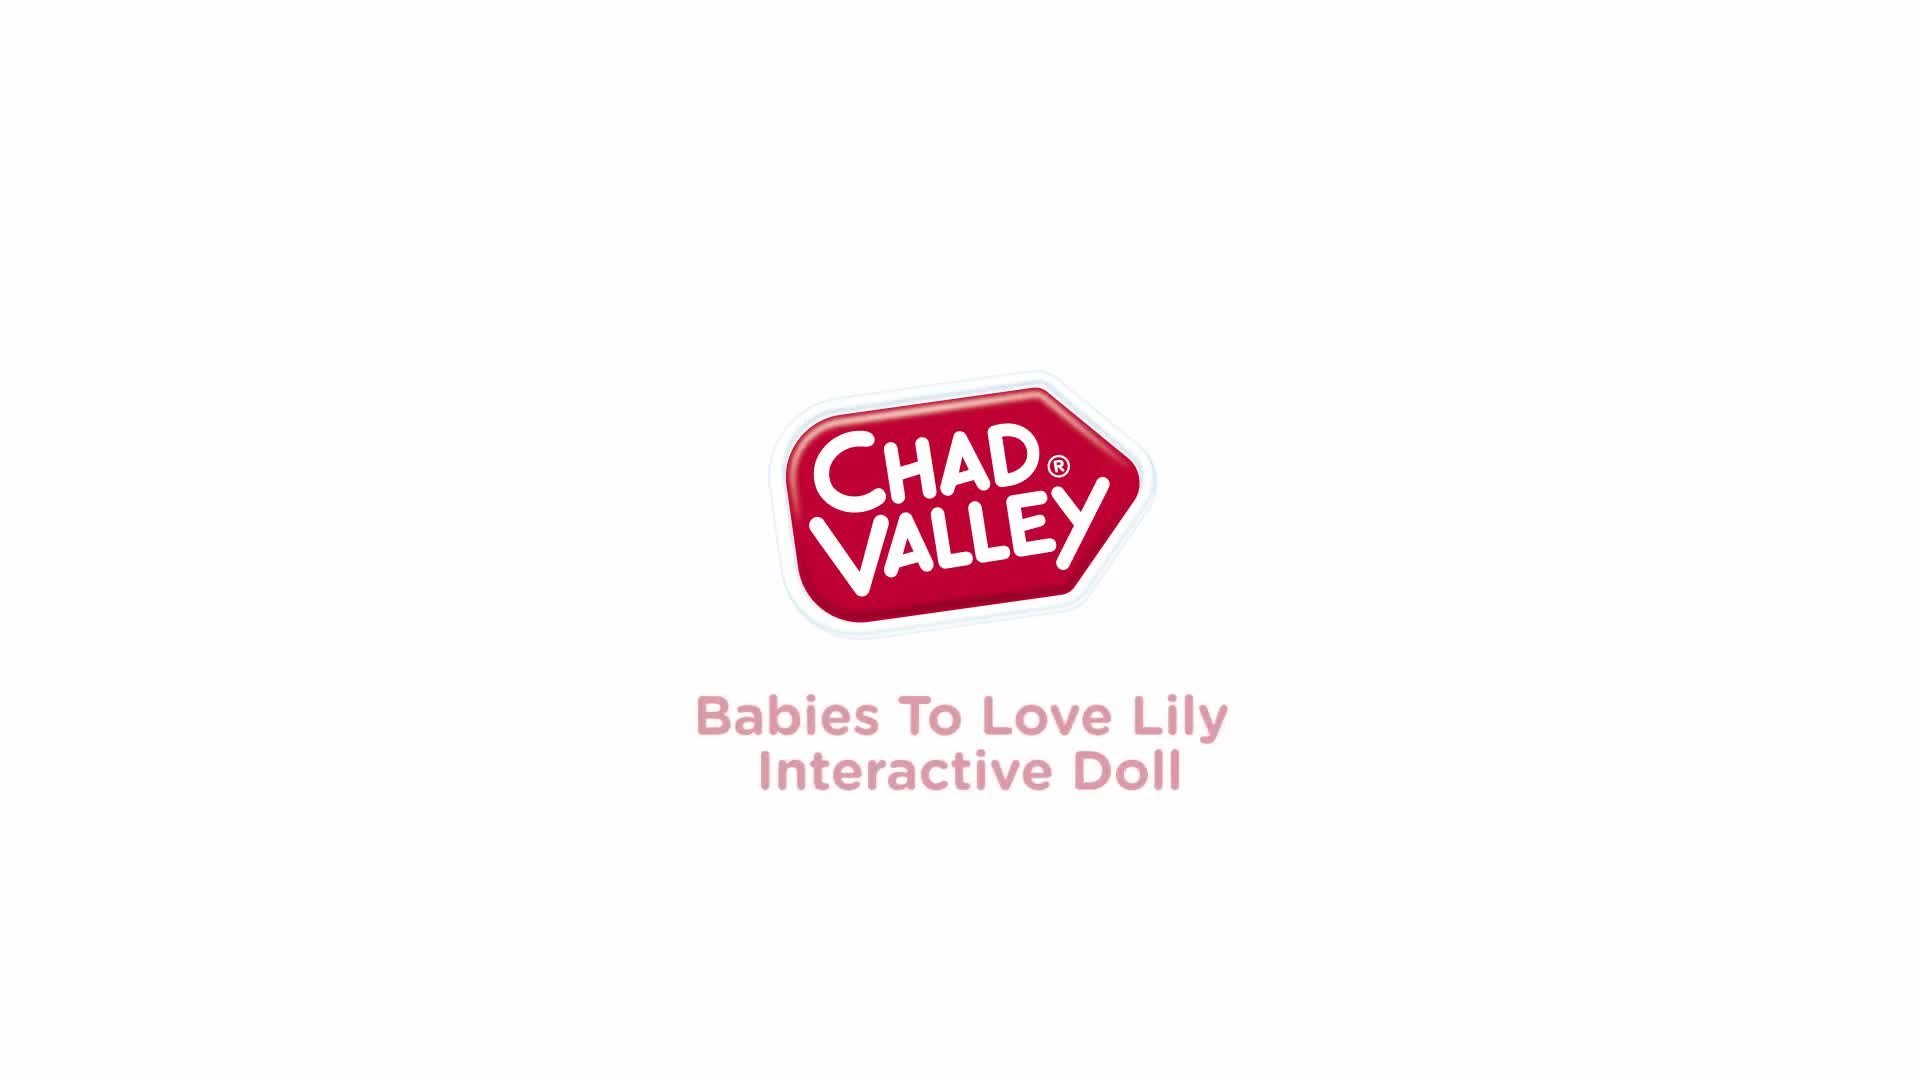 chad valley lily interactive